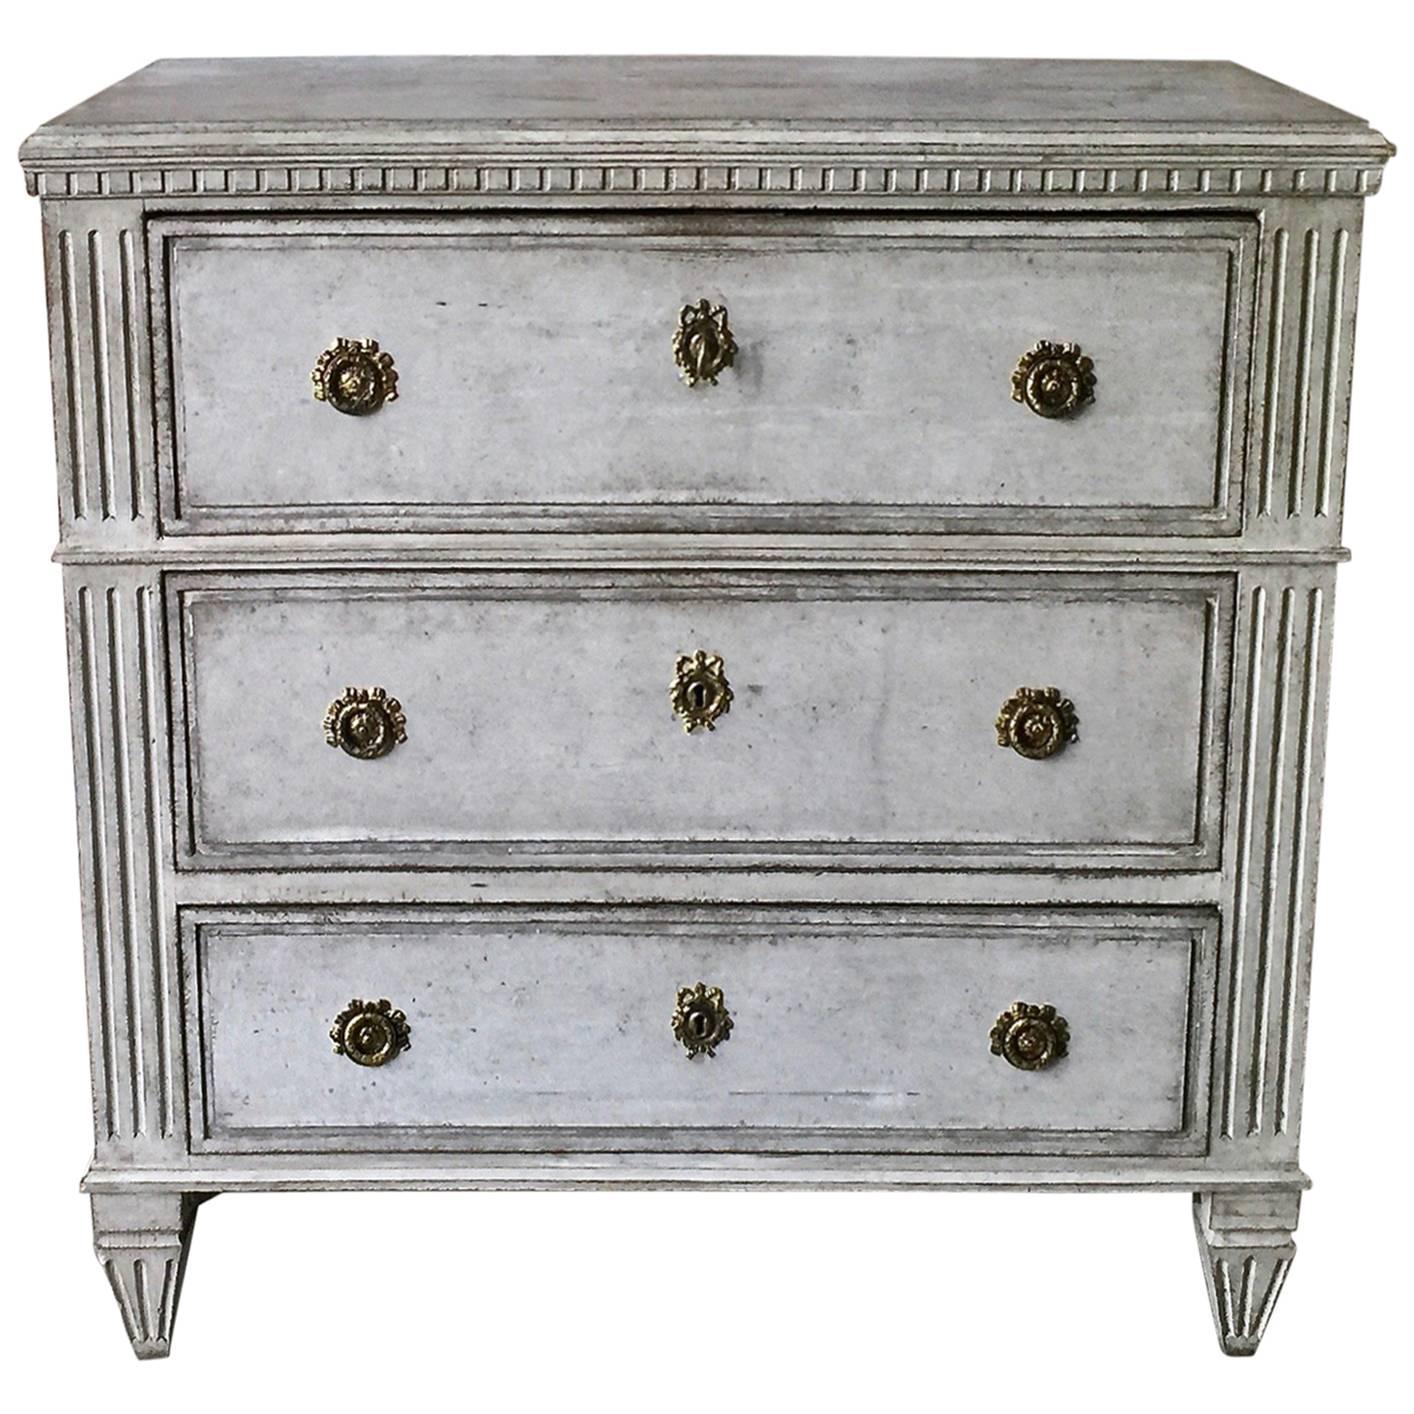 Late Gustavian Period Chest of Drawers